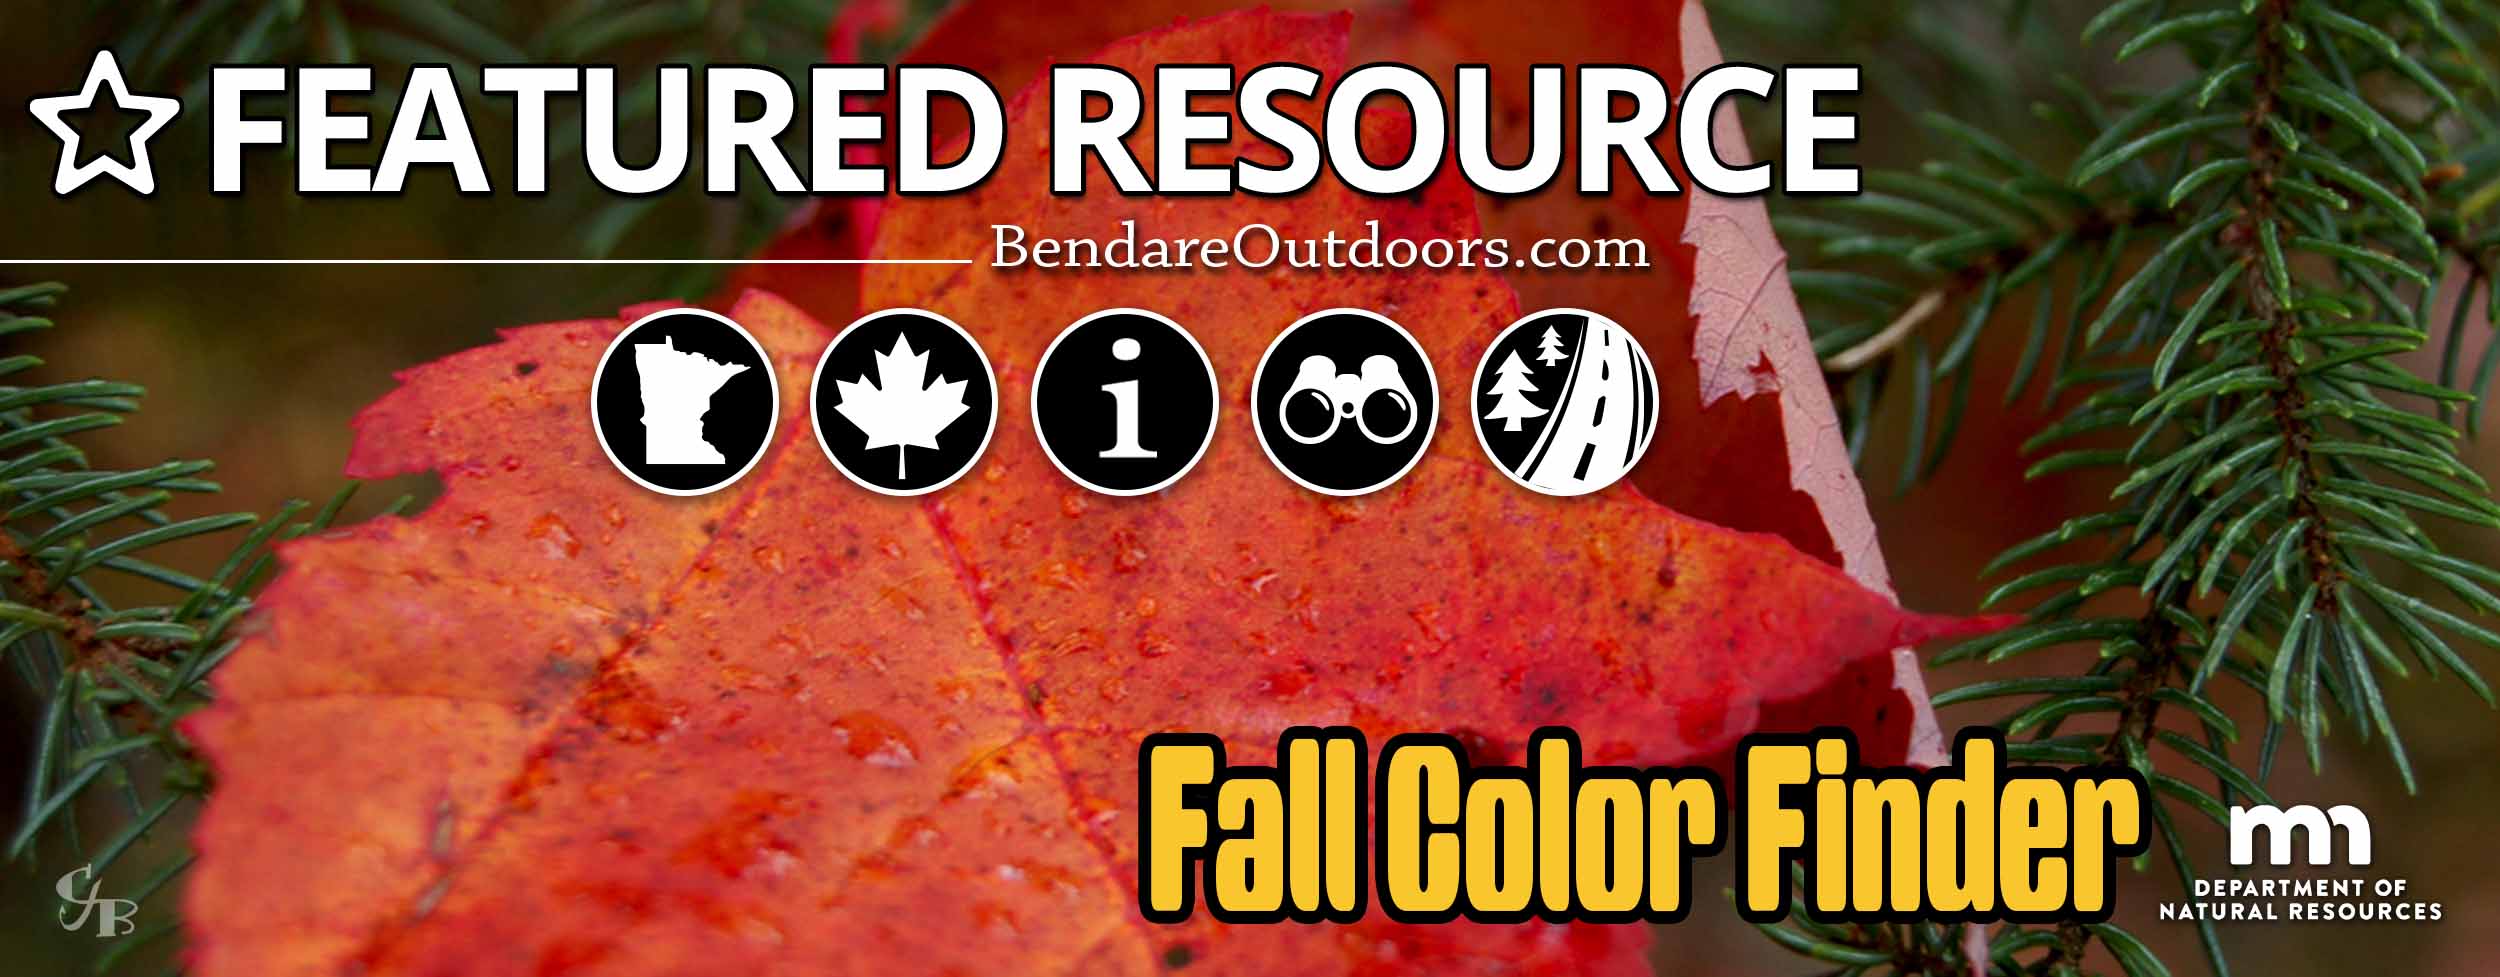 Featured Minnesota Resource: Fall Color Finder | Bendare Outdoors